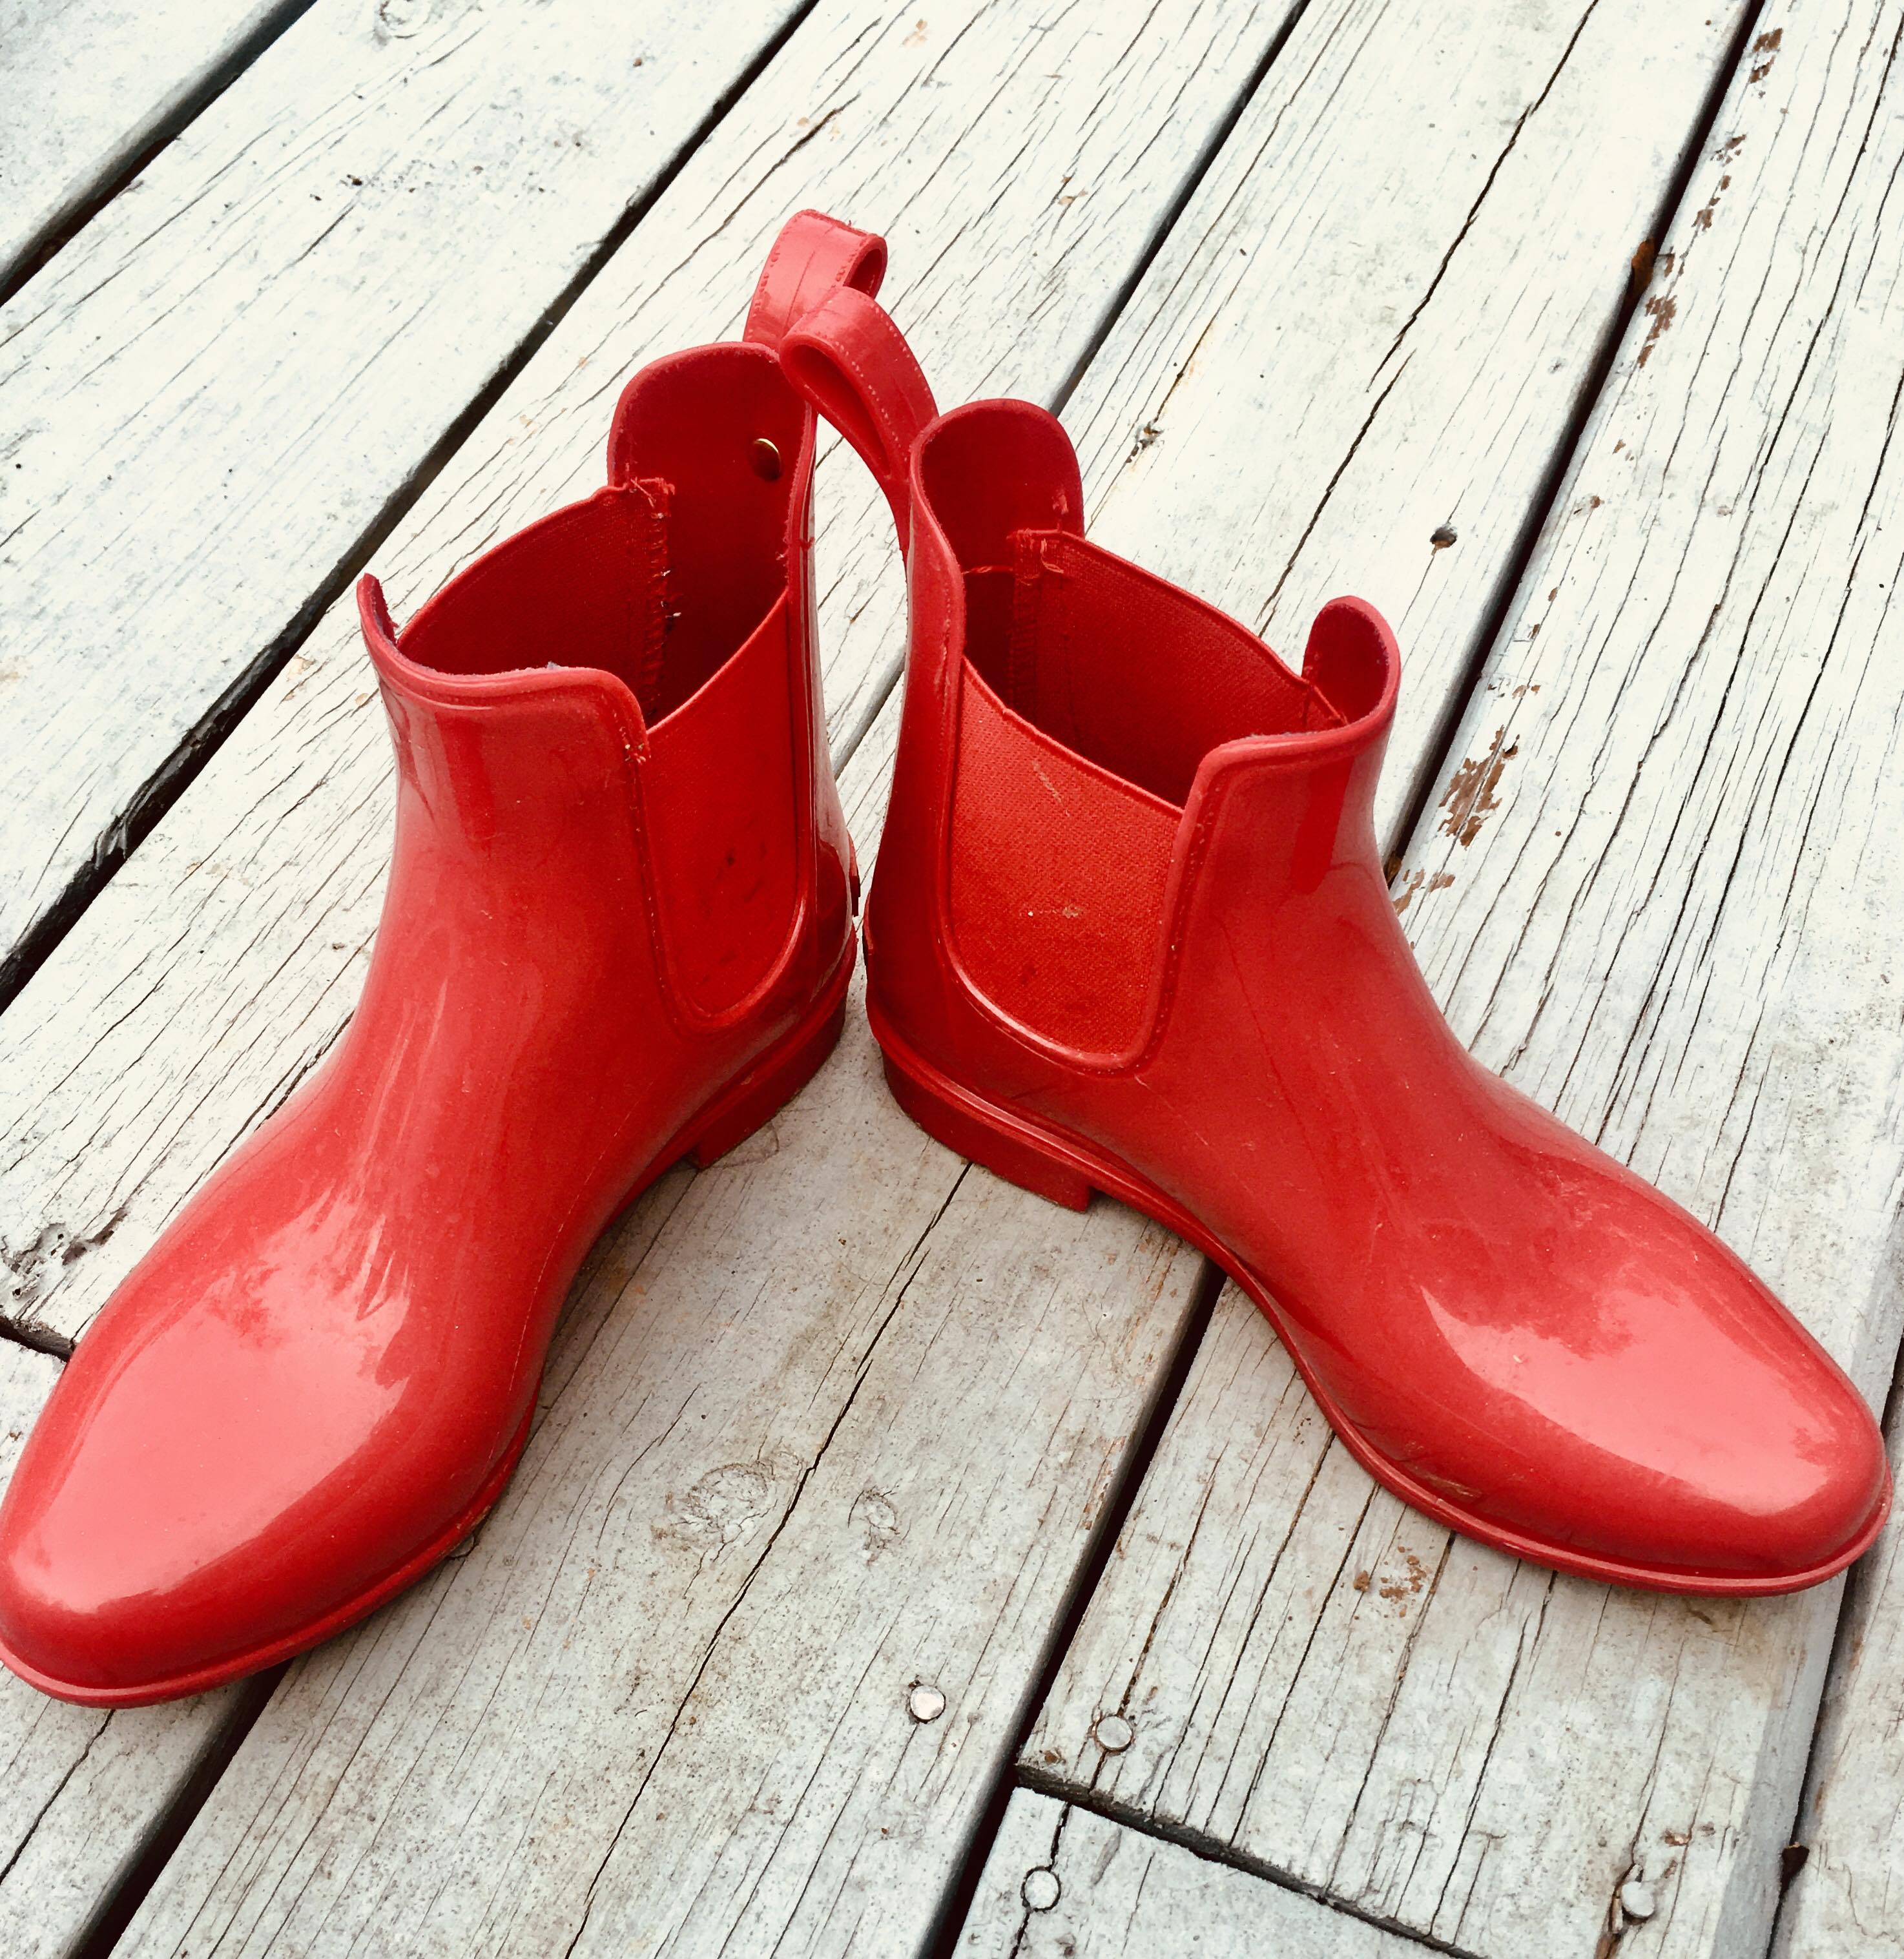 The Girl in the Red Rubber Boots